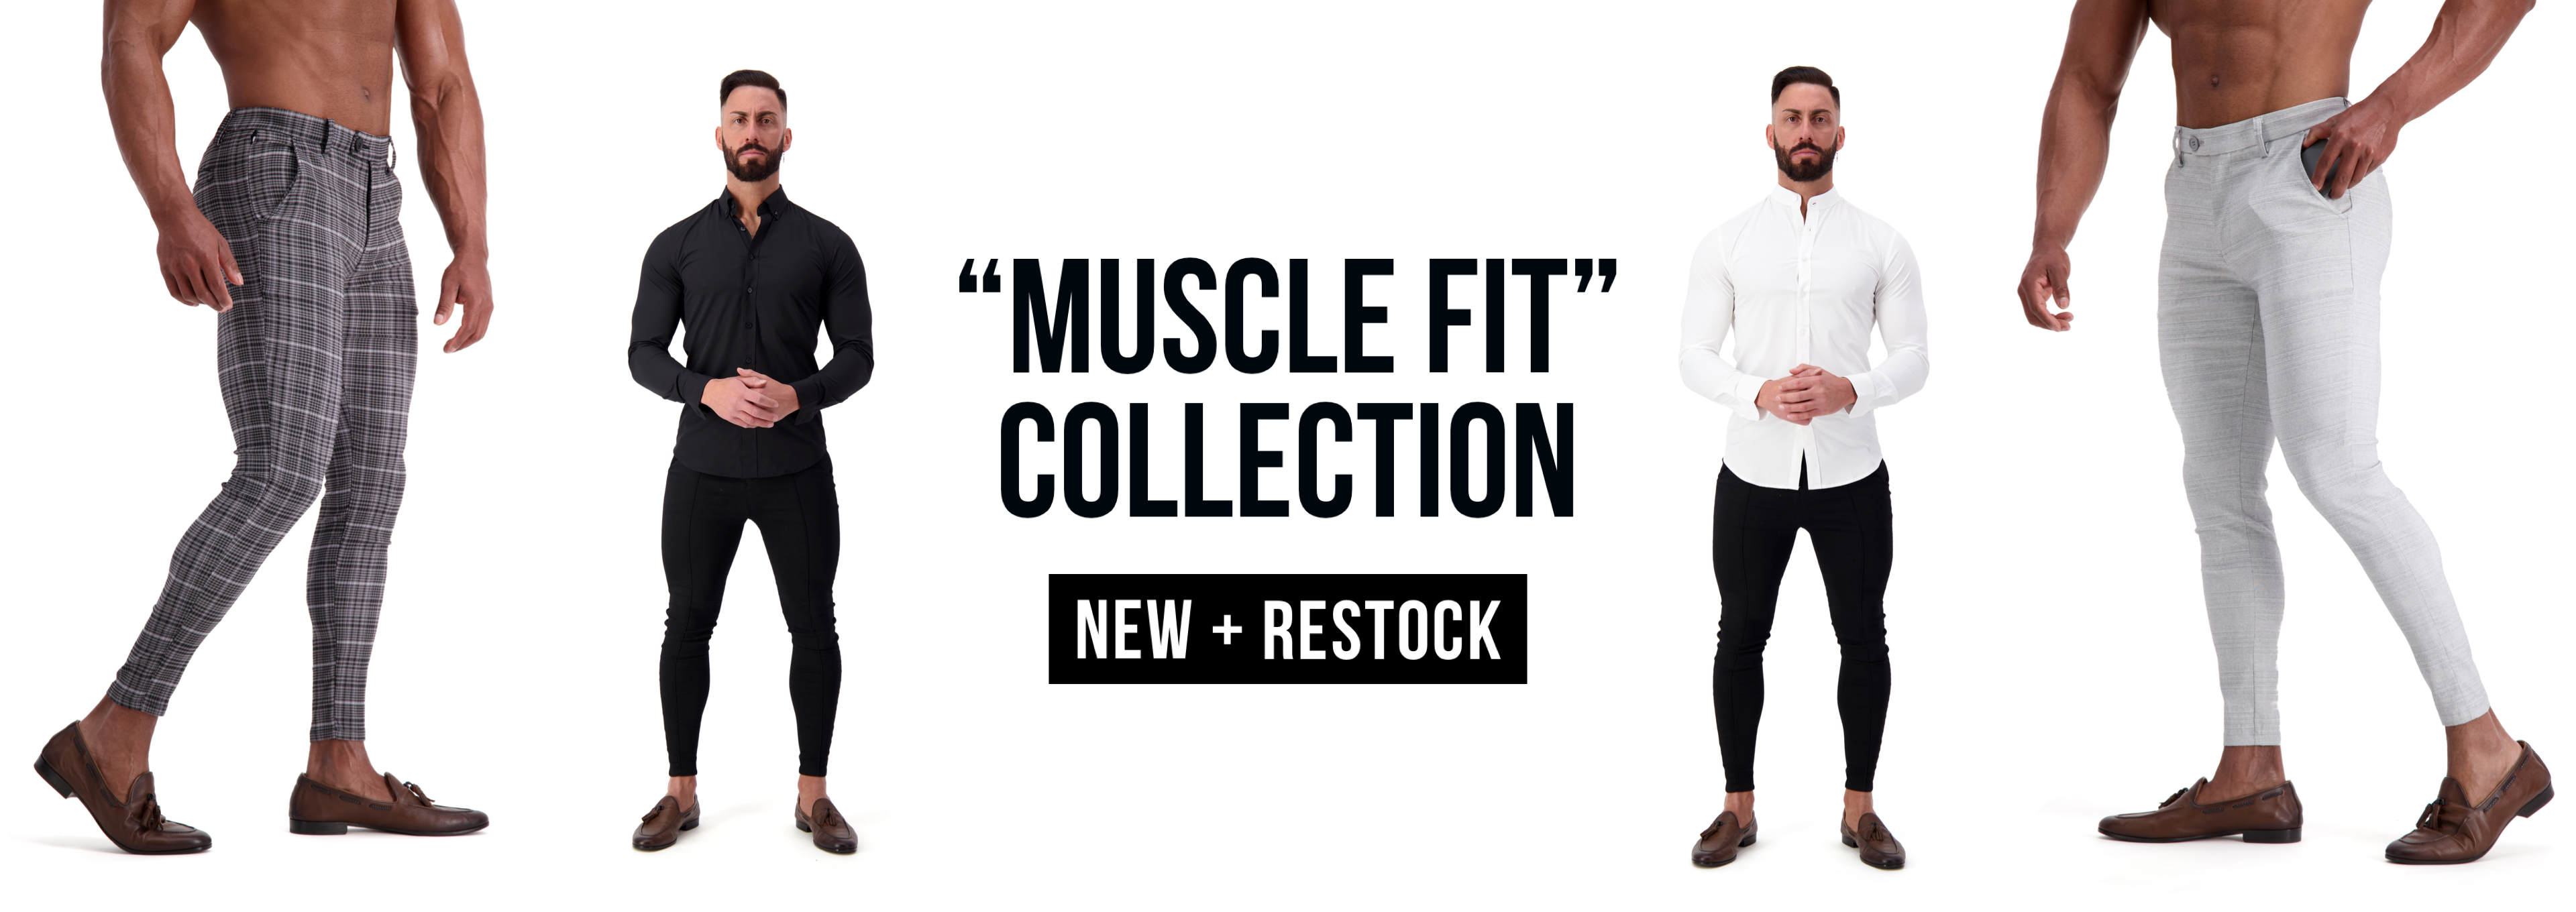 Muscle Fit Collection Banner